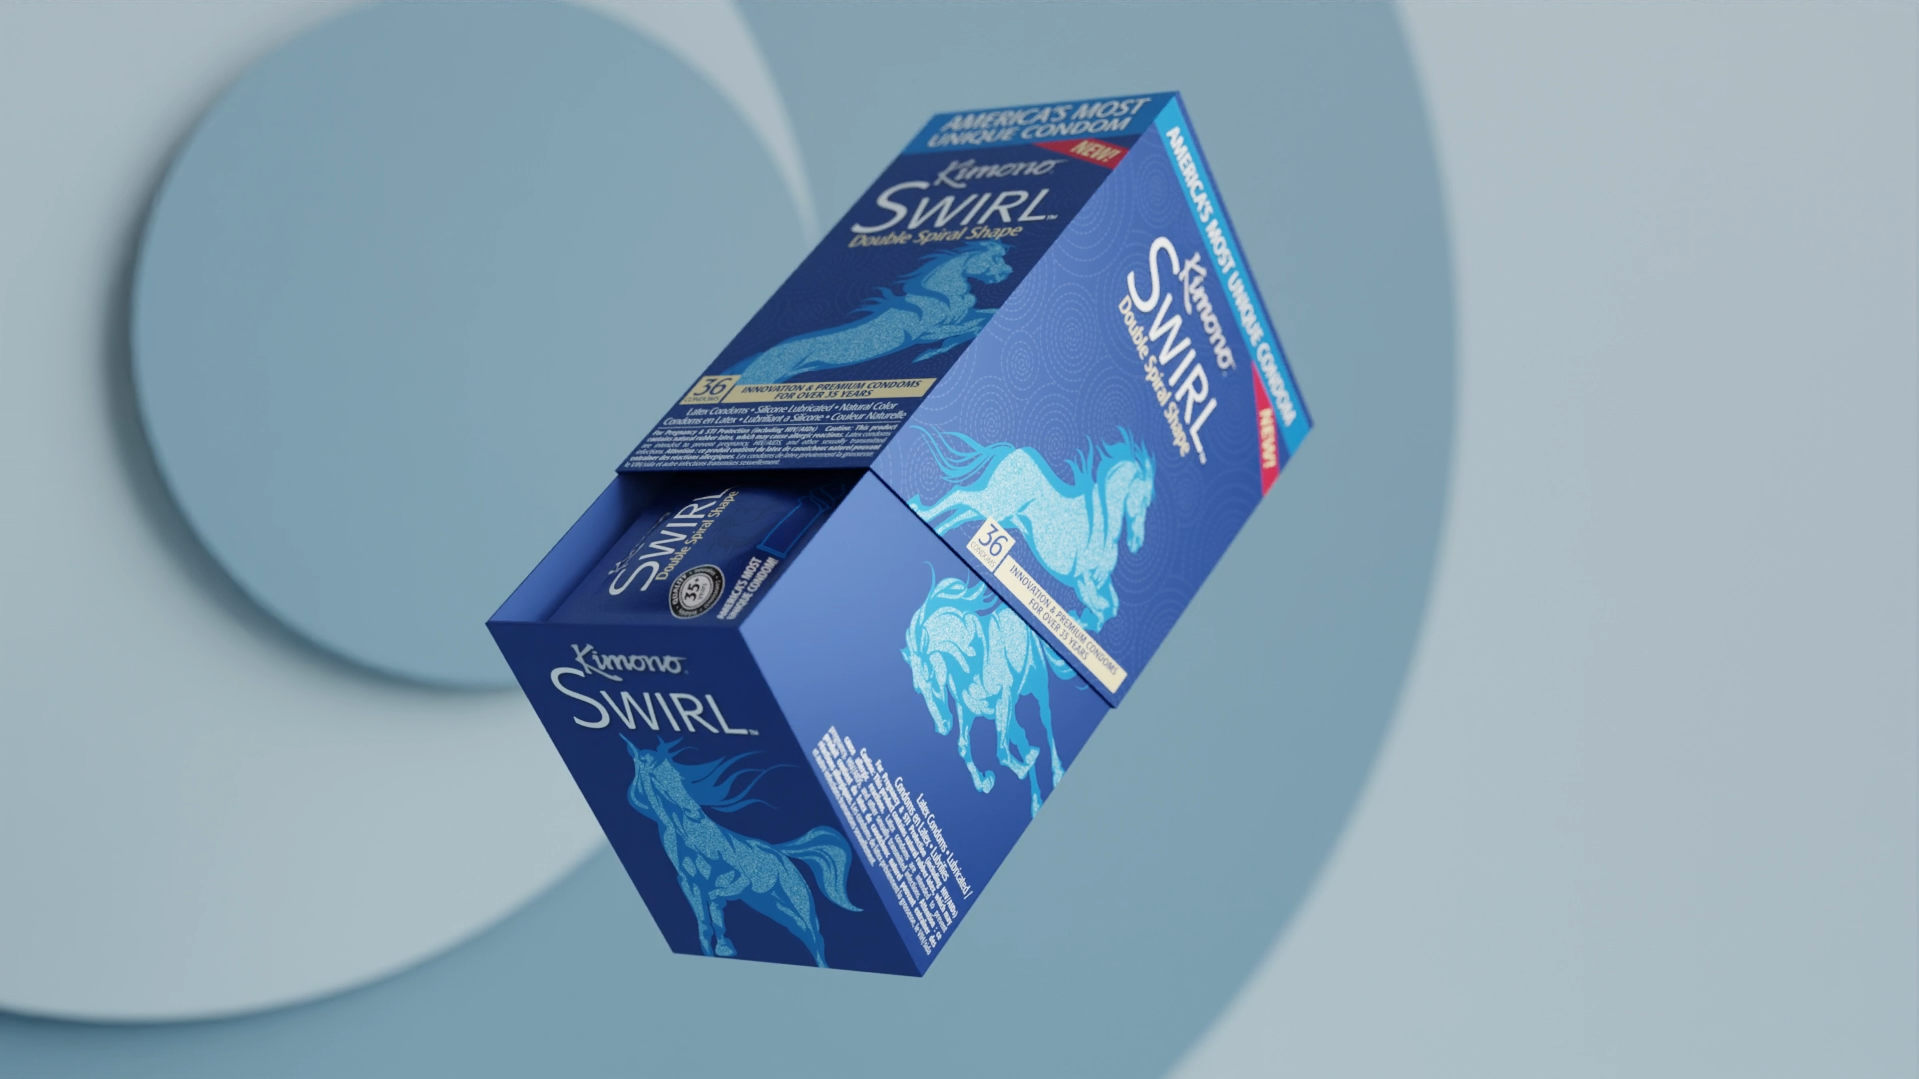 Video laden: Kimono Swirl condoms, America&#39;s only double helix shaped condom. The condom is revealed out of the packaging. It uses premium natural latex. Less constriction, more comfort. Double swirl for added comfort, friction, and energy. For him, her, and them. What are you waiting for? Get your swirl on.